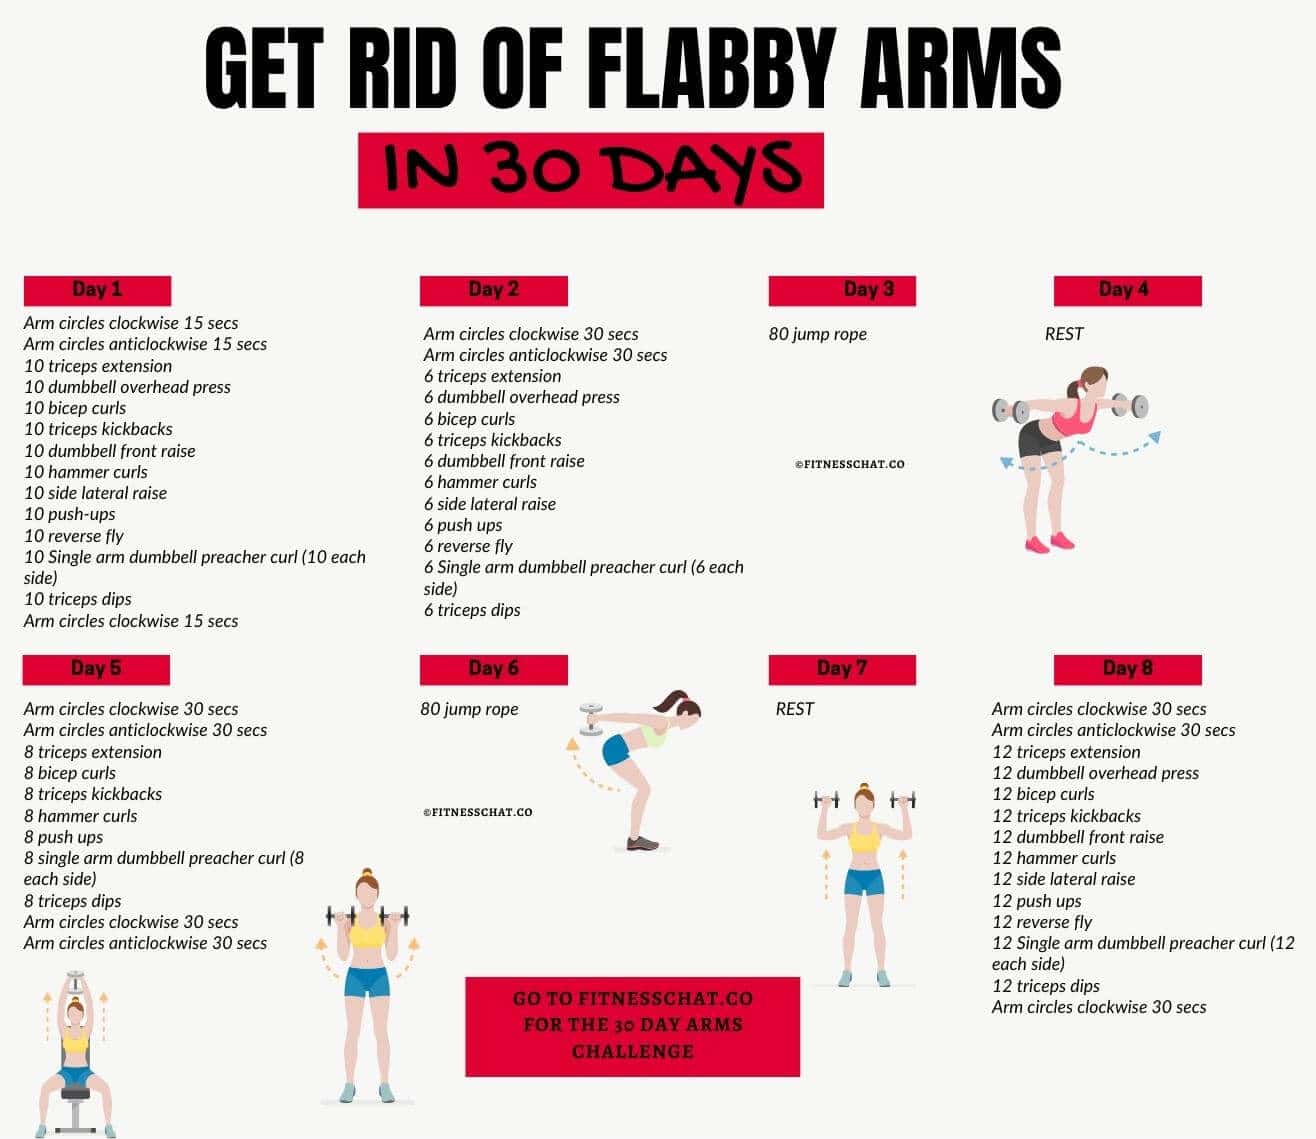 get rid of flabby arms in 30 days